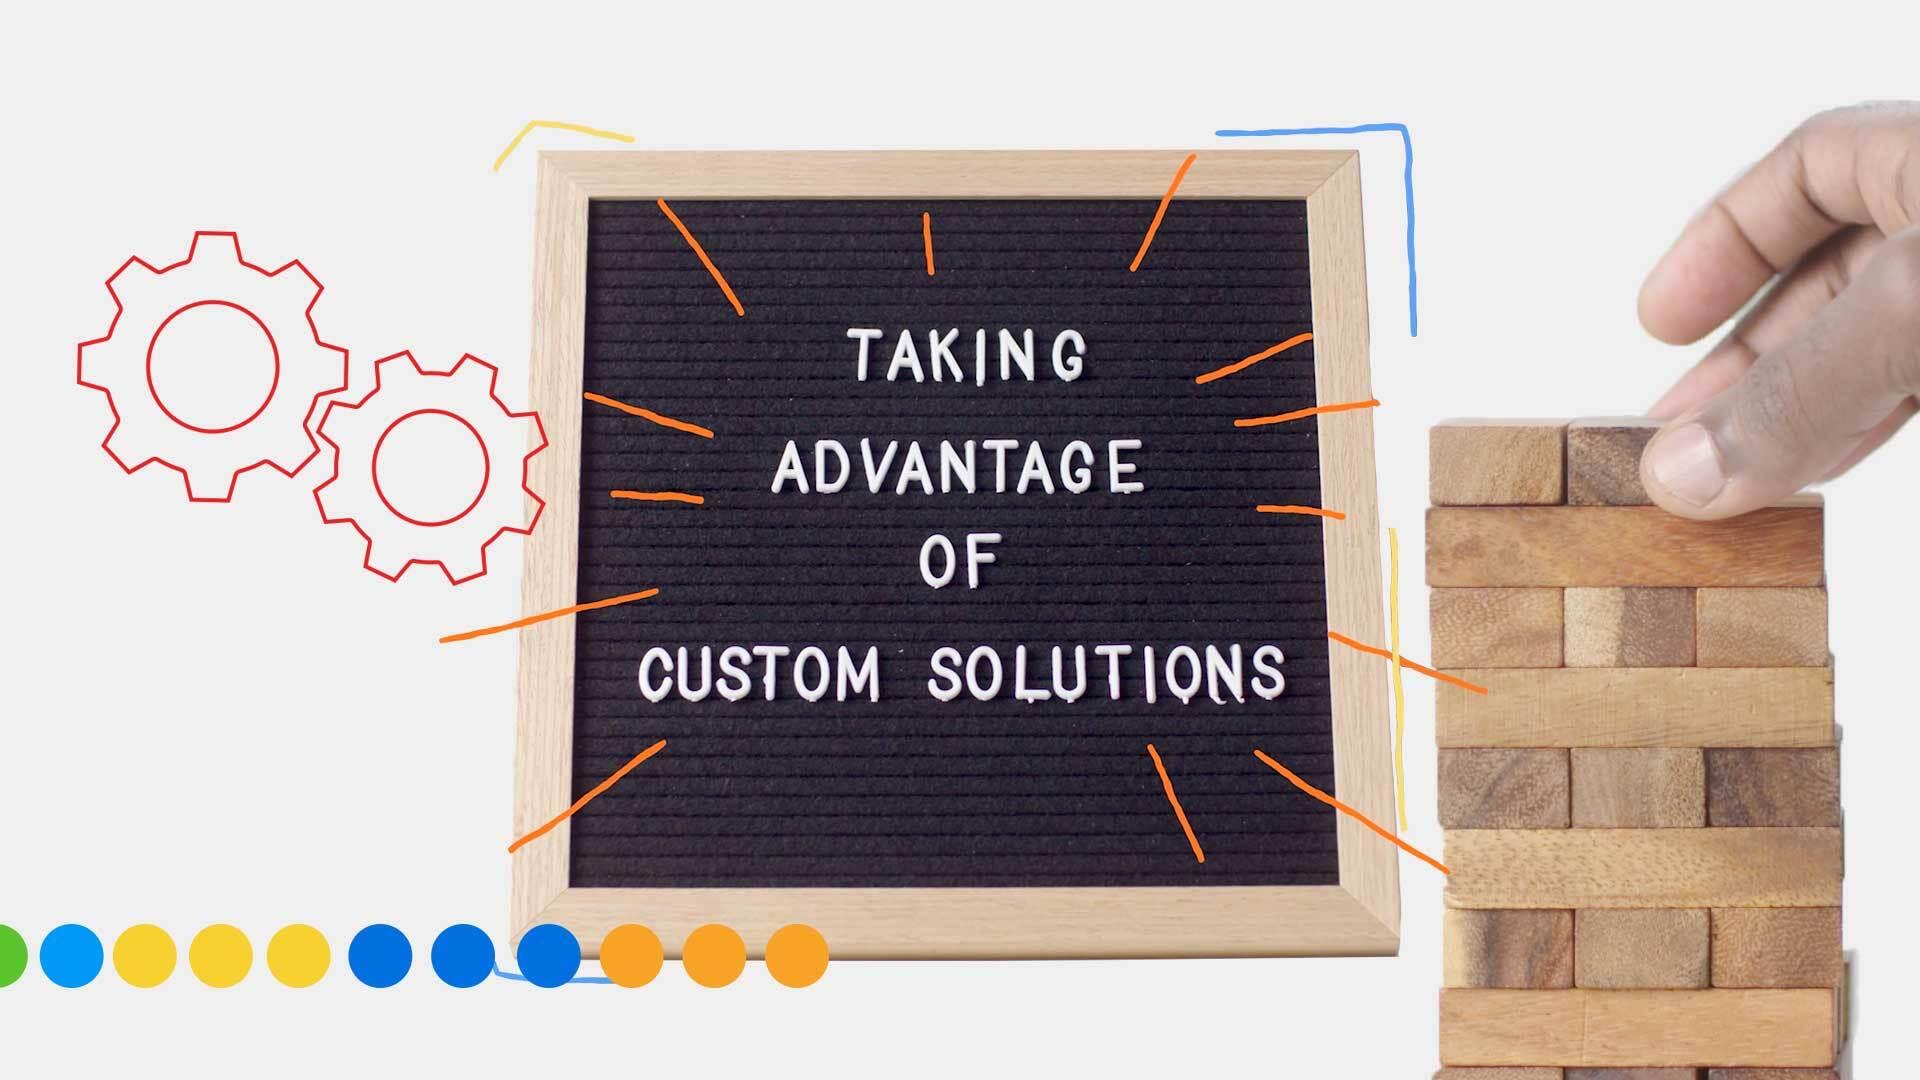 A letter board reads "Taking advantage of custom solutions" while a hand builds a tower on the right hand side.